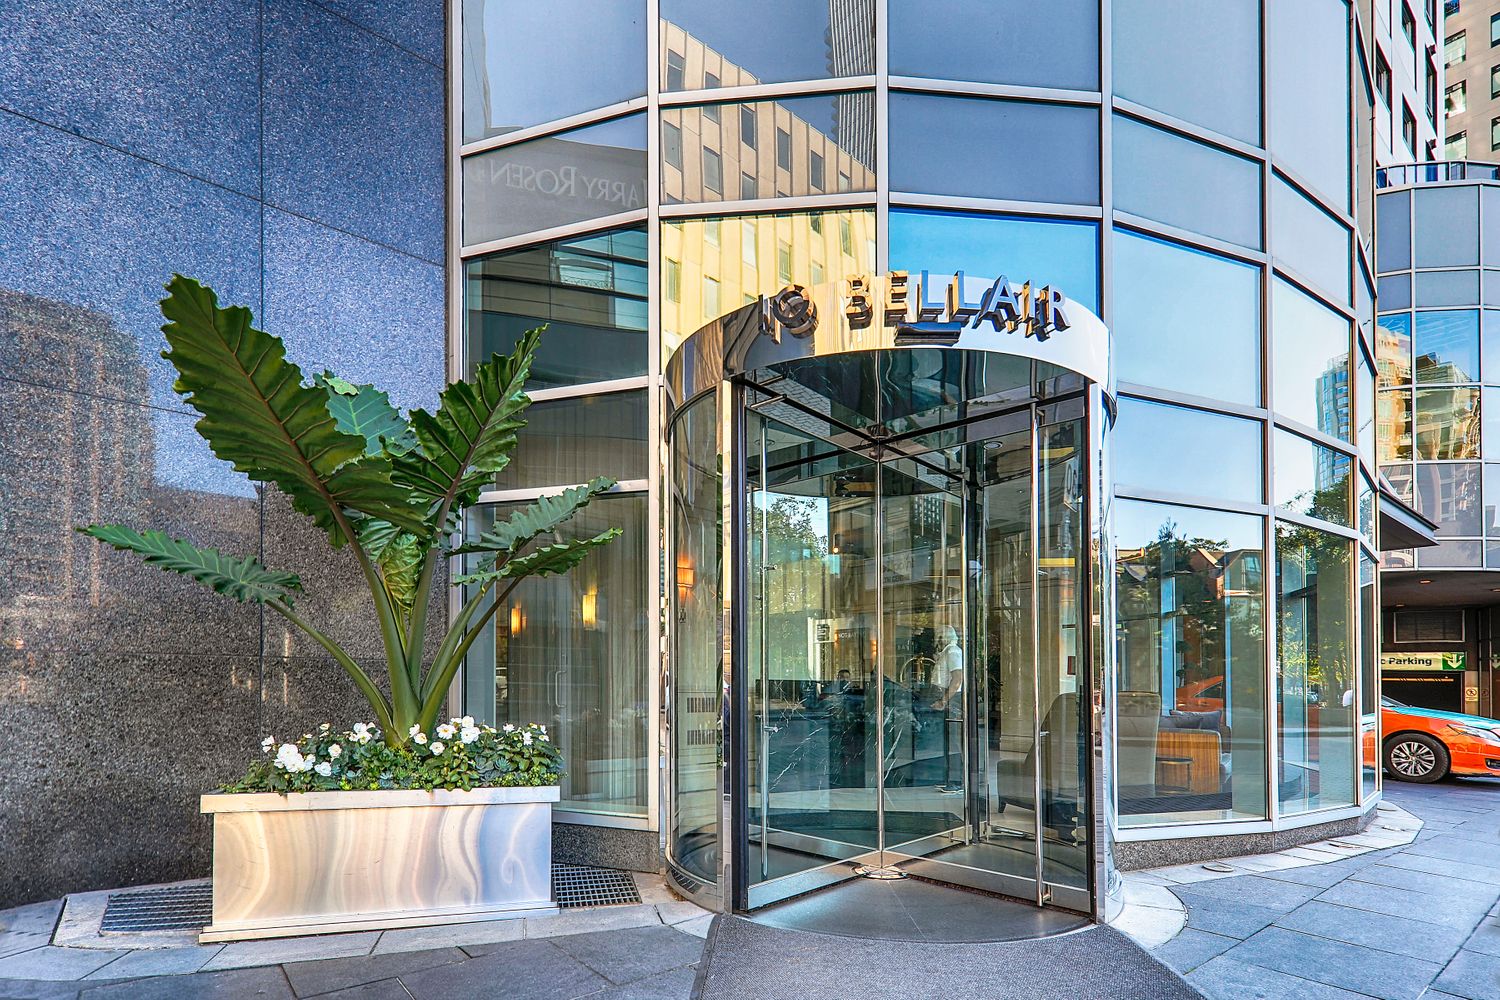 10 Bellair Street. No 10 Bellair is located in  Downtown, Toronto - image #4 of 5